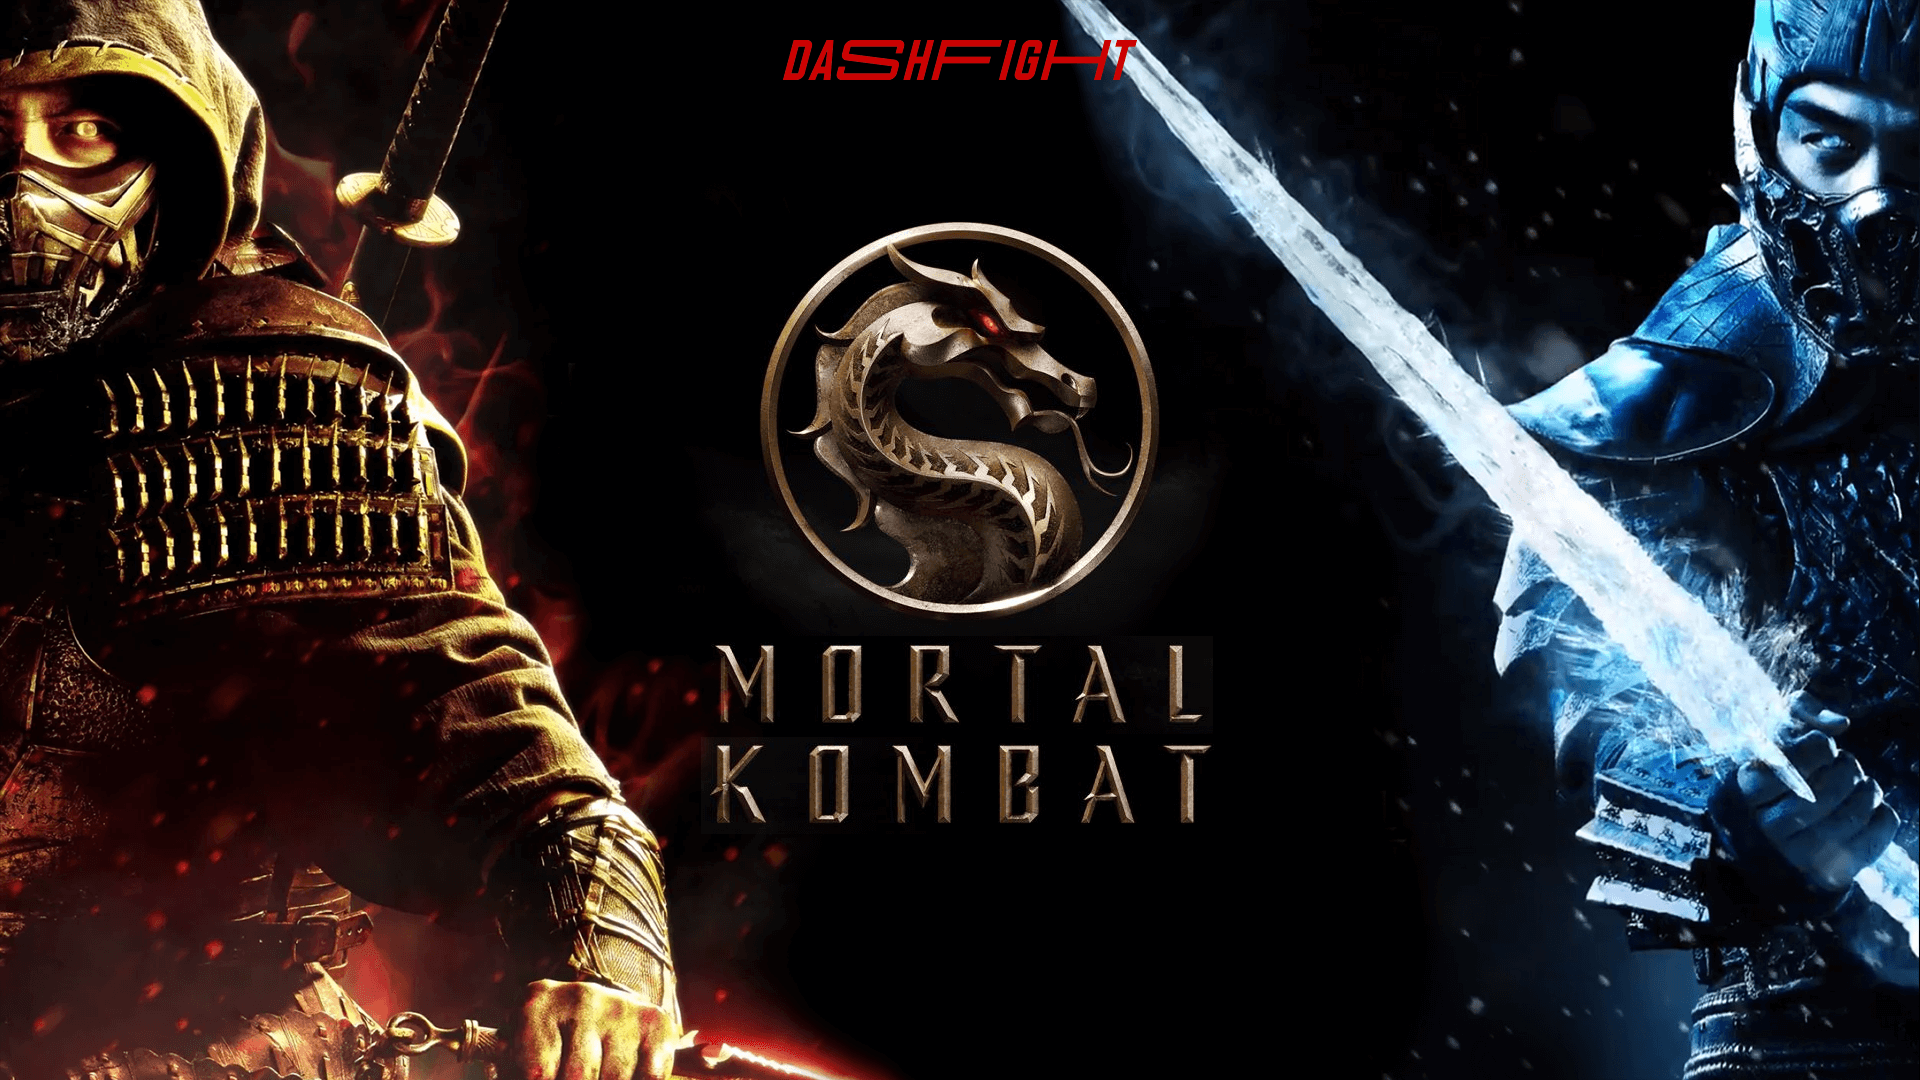 The Mortal Kombat Movie release has been delayed until April 23rd